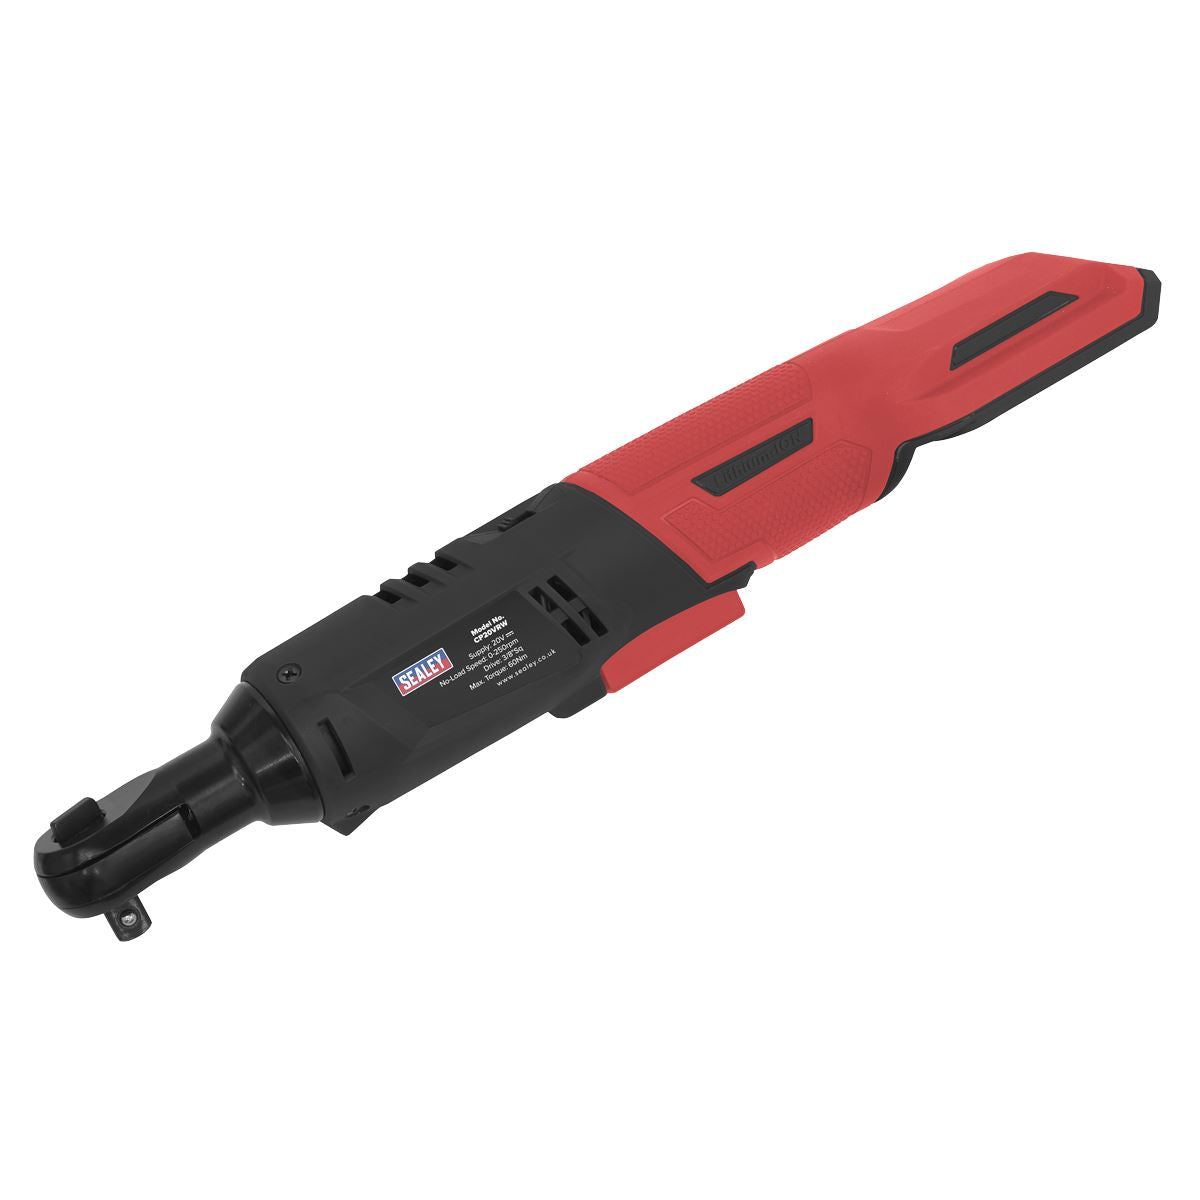 Sealey Ratchet Wrench 20V SV20 Series 3/8"Sq Drive 60Nm - Body Only